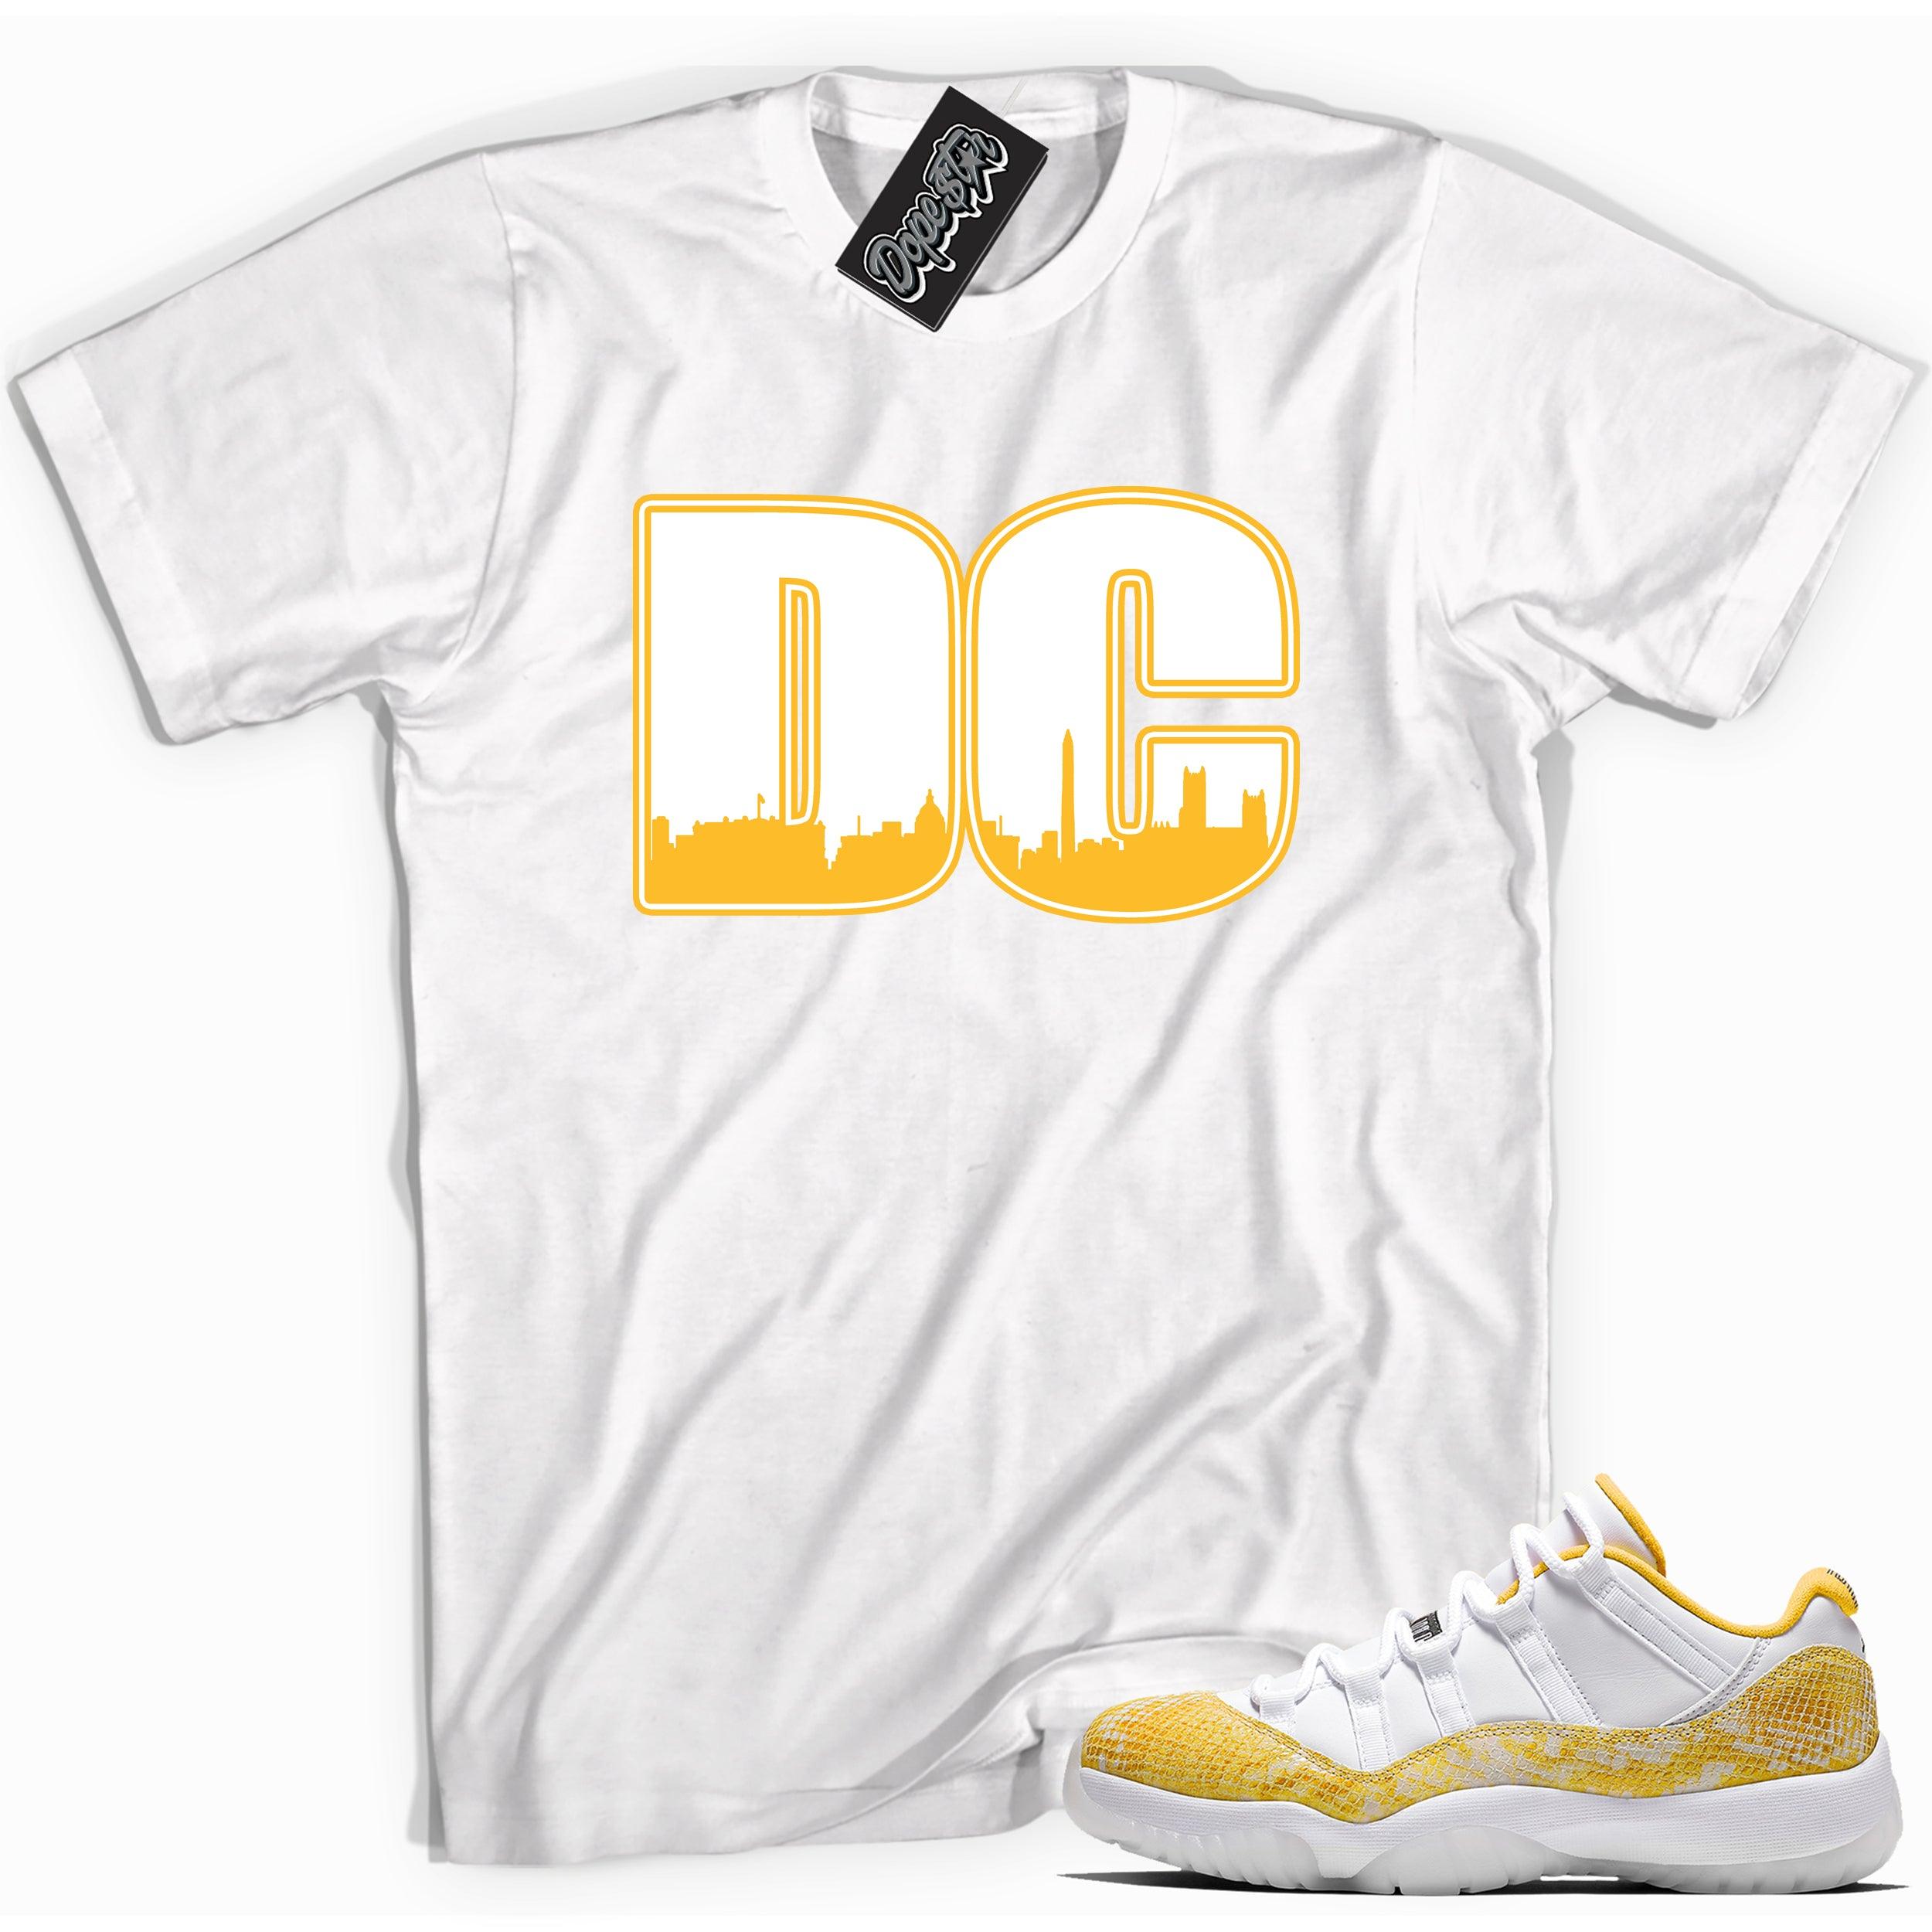 Cool white graphic tee with 'dc' print, that perfectly matches Air Jordan 11 Low Yellow Snakeskin sneakers